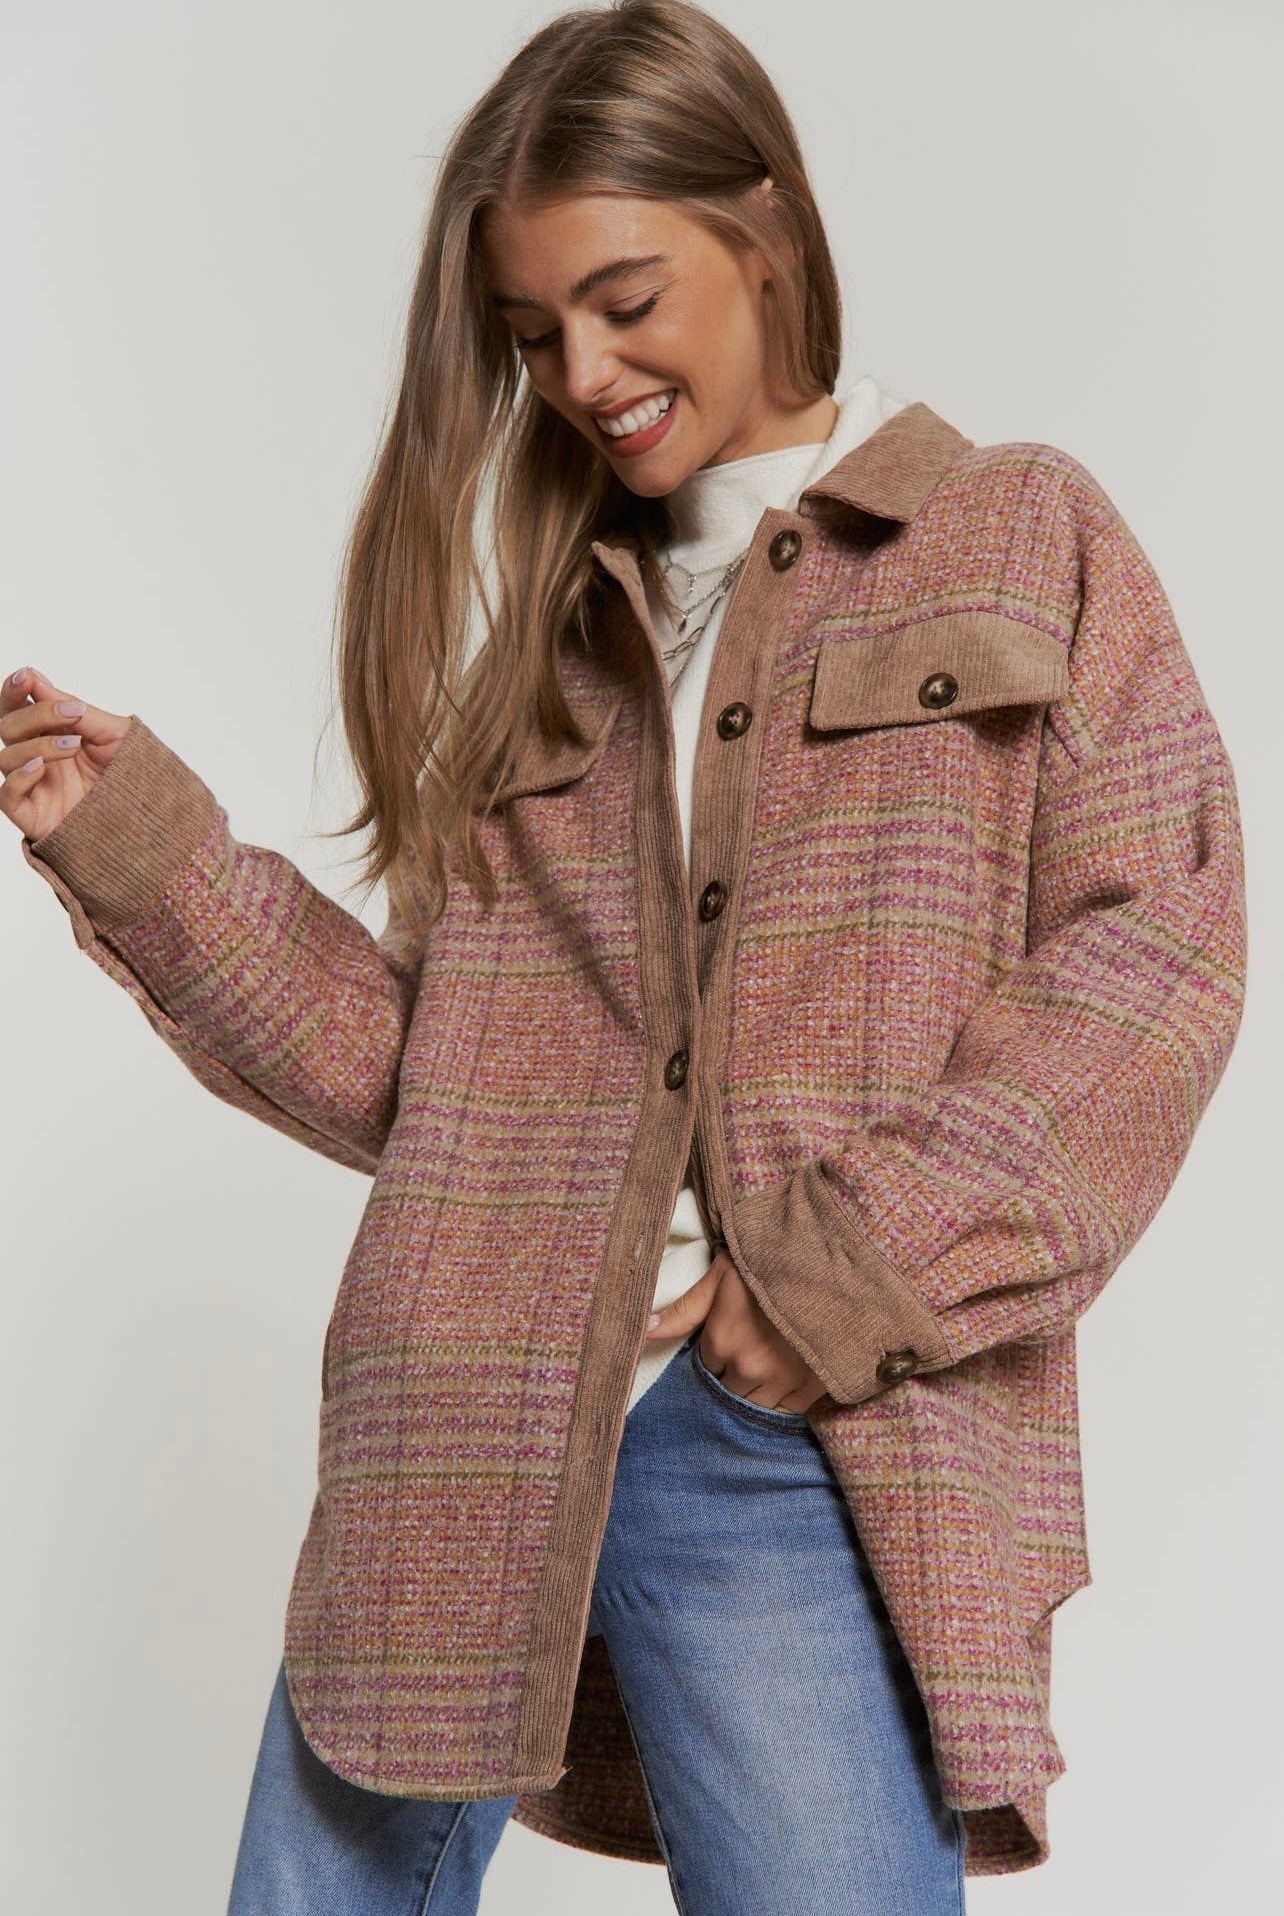 Cassidy Plaid Button Down Jacket